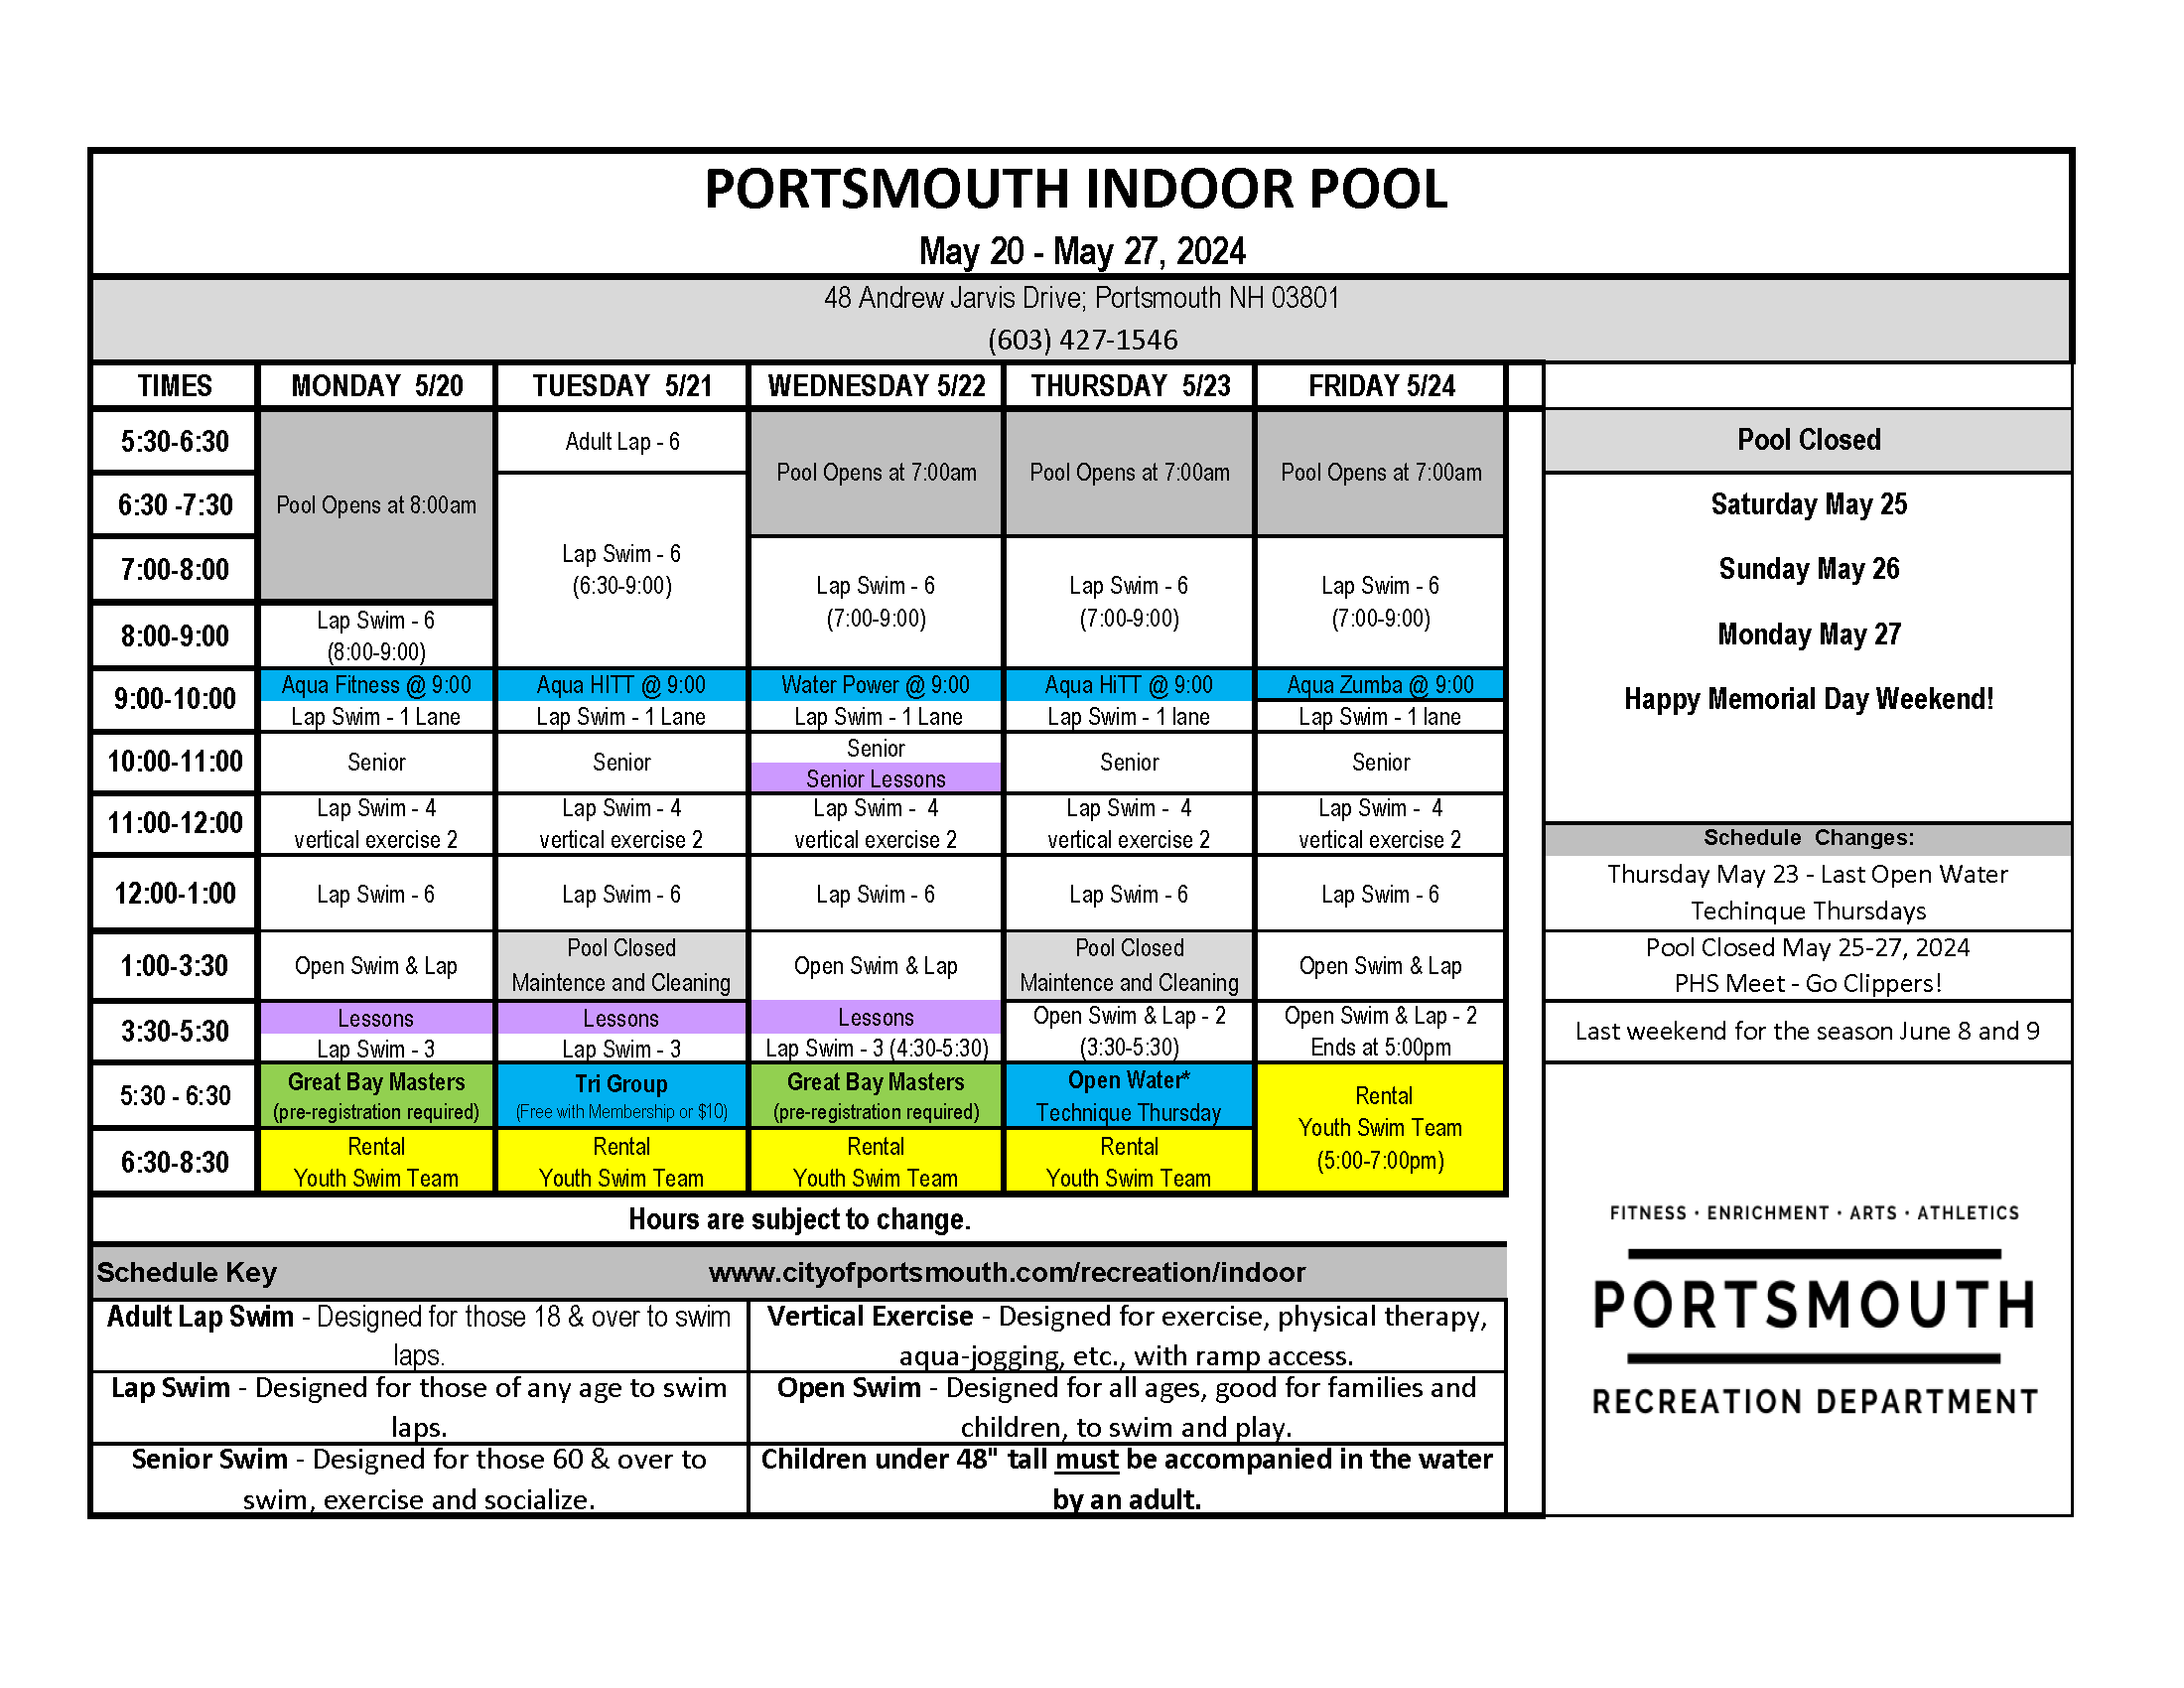 pool schedule pic